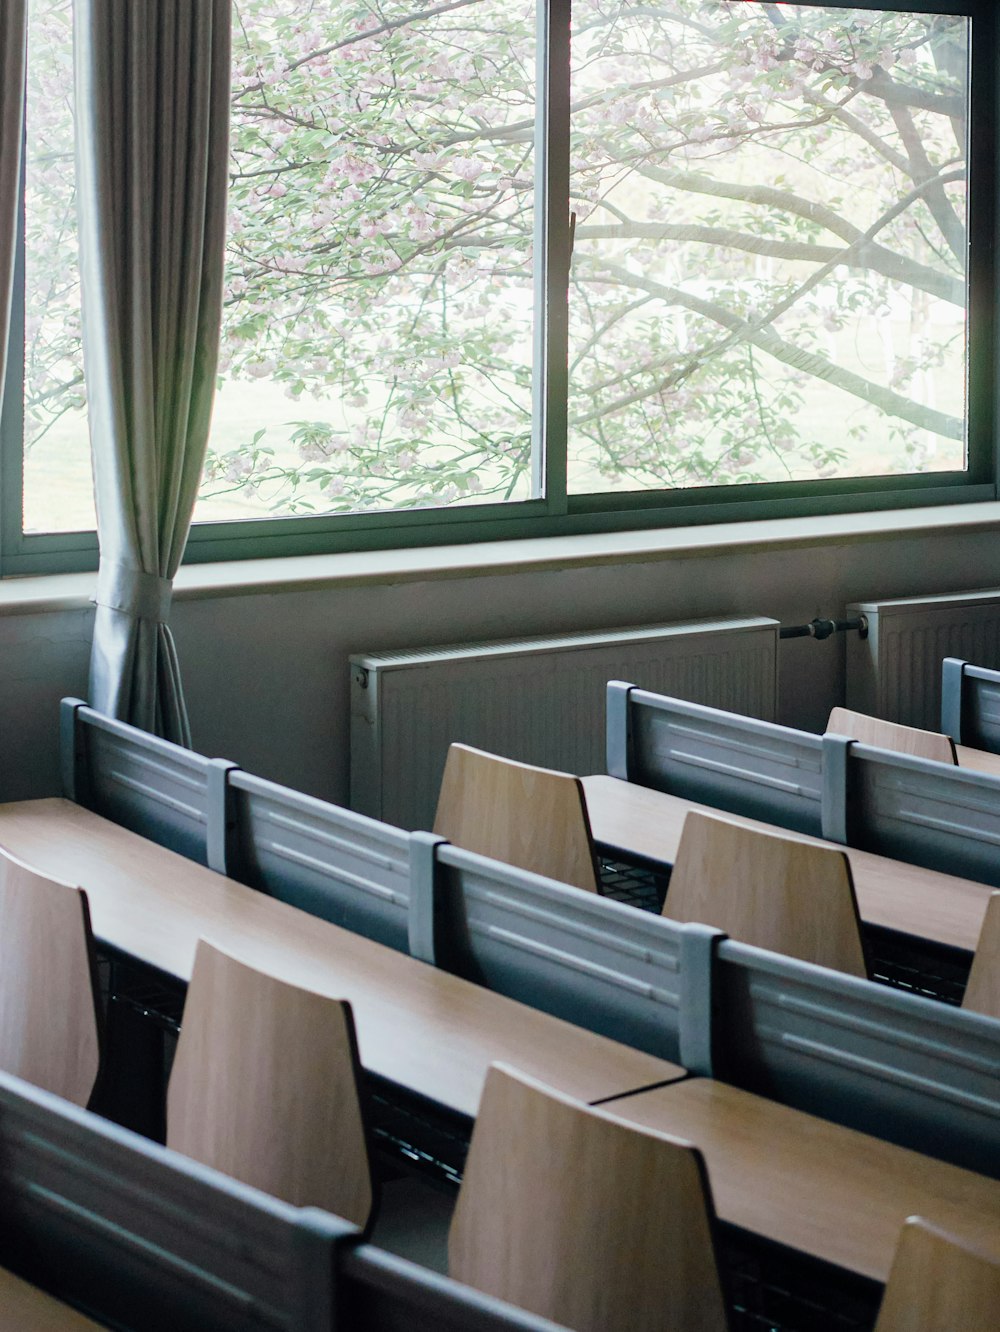 a classroom with rows of desks in front of a window